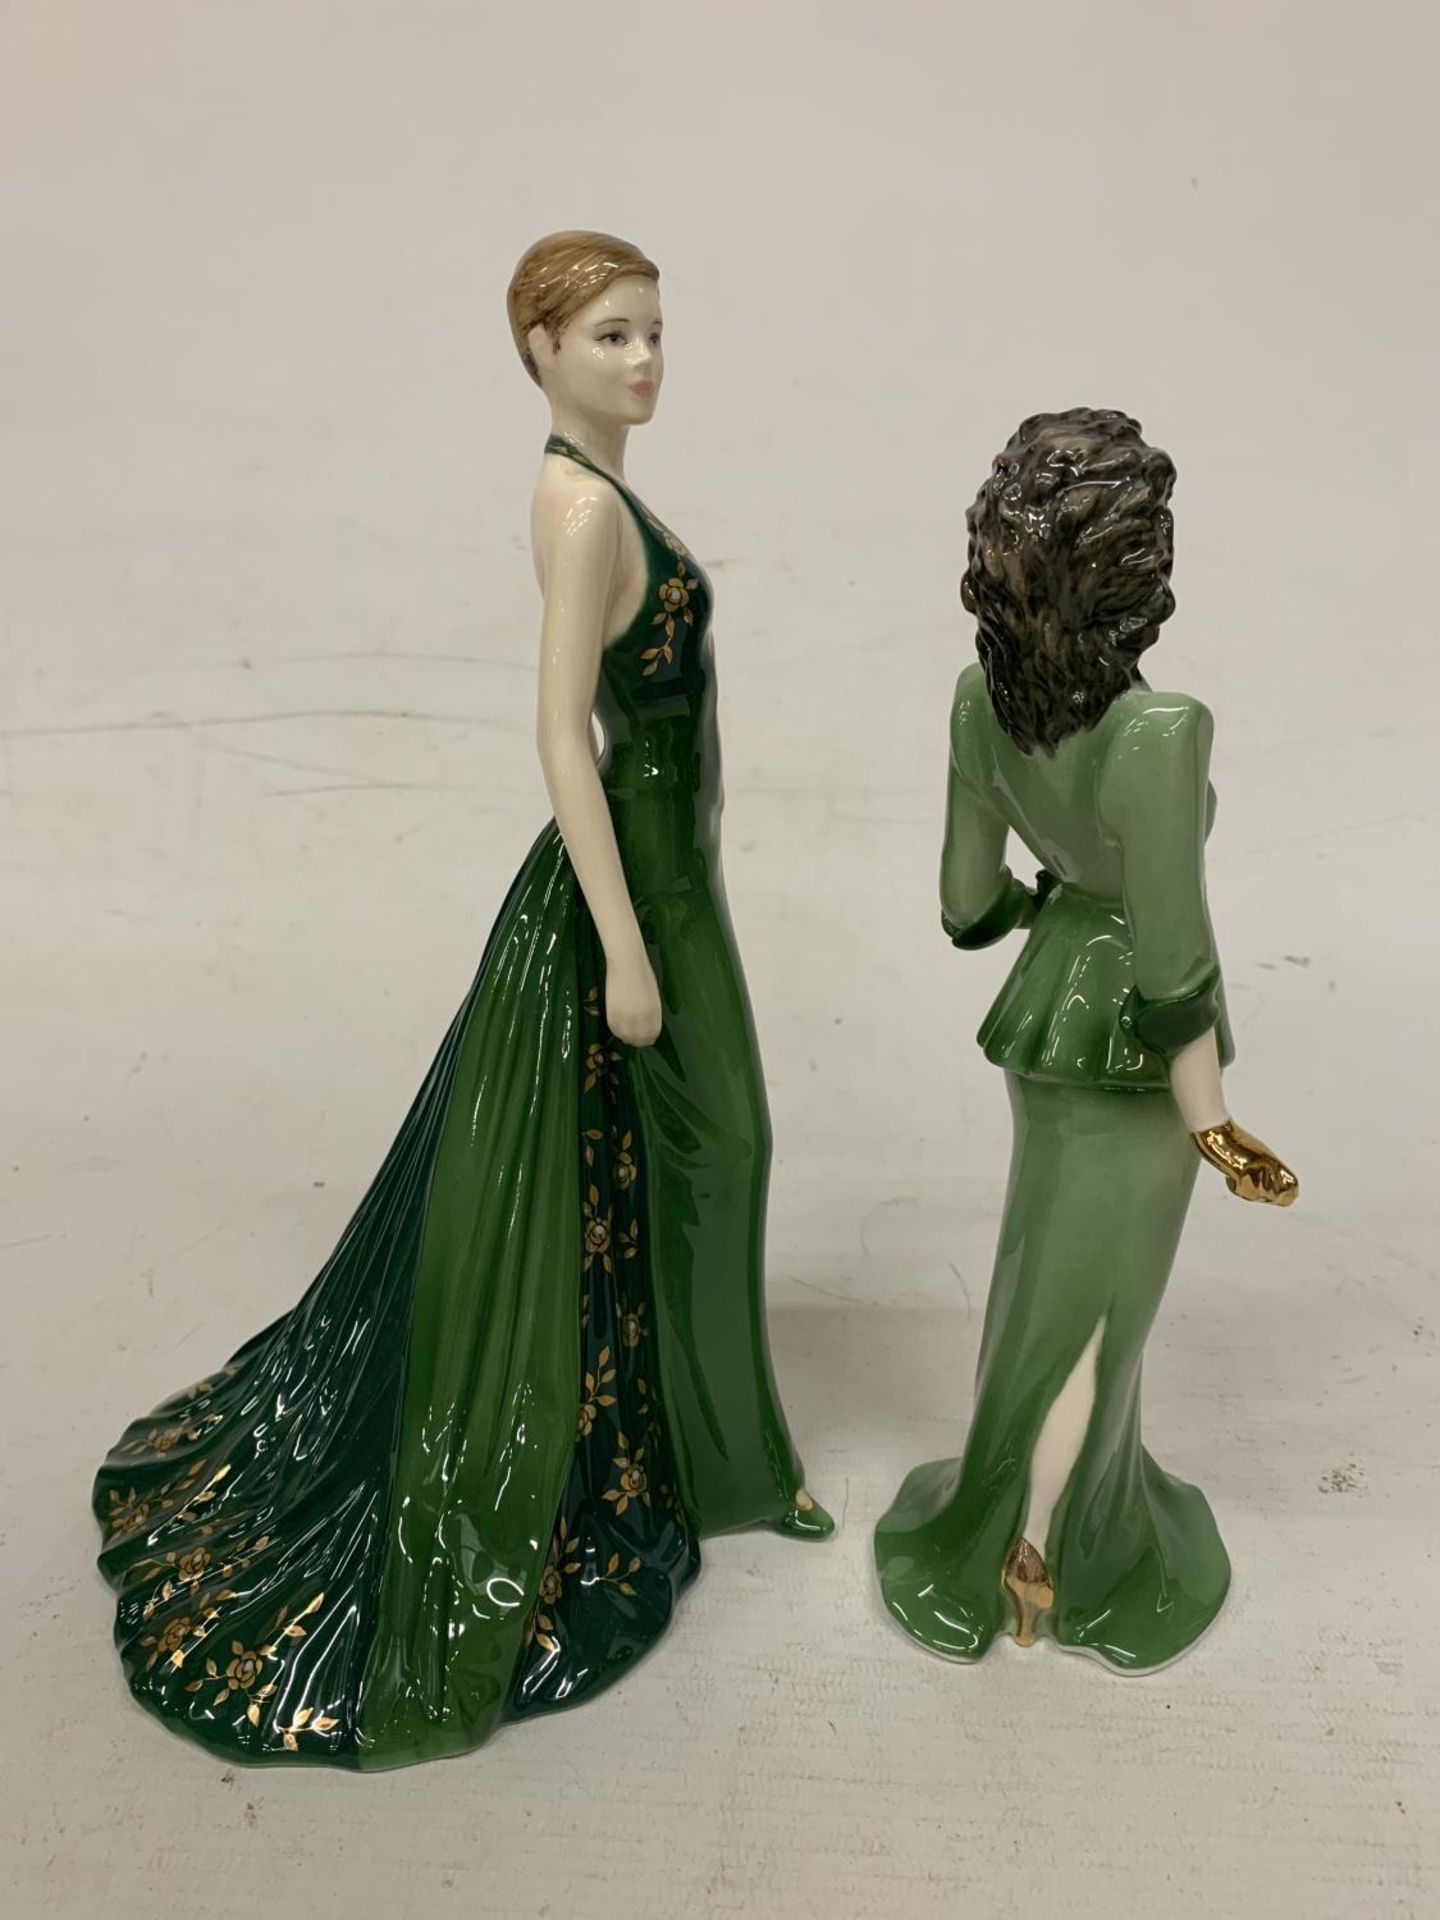 TWO COALPORT FIGURINES "VIVIEN" FROM THE WESTEND GIRLS COLLECTION (1992) AND "SAMANTHA" FIGURE OF - Image 2 of 5